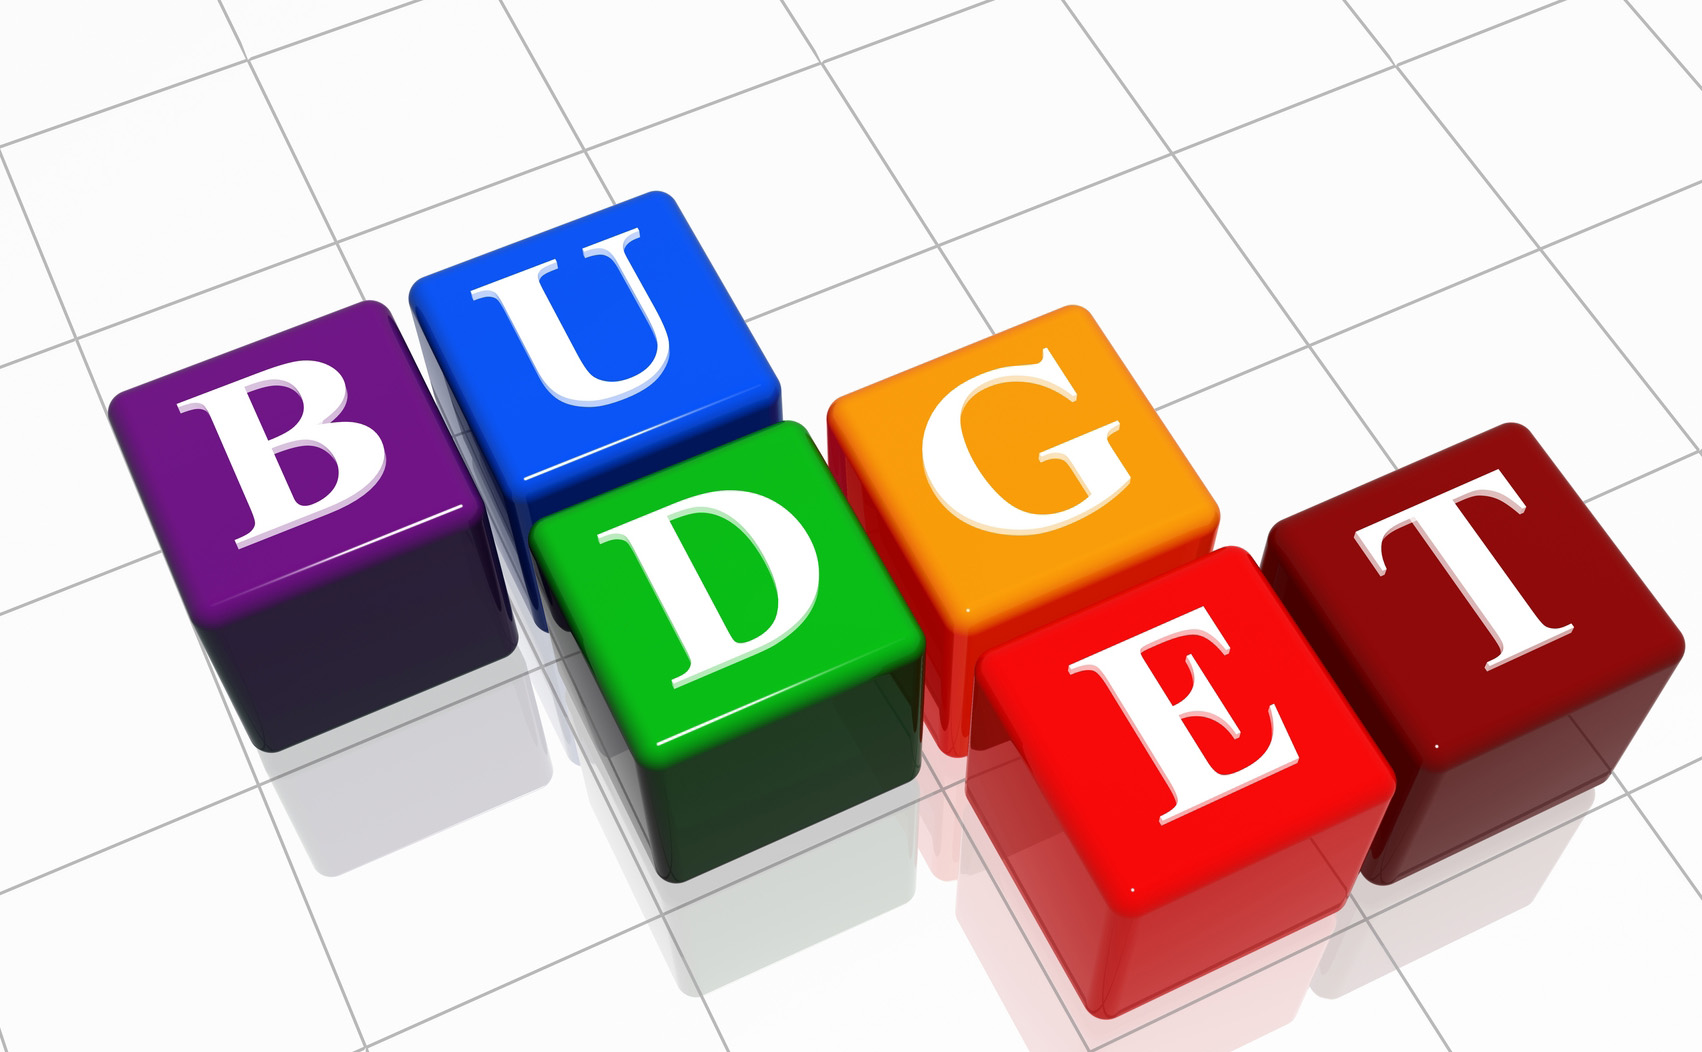 A 3D illustration of multi-colored blocks with white letters spelling out 'BUDGET' on a white grid background.